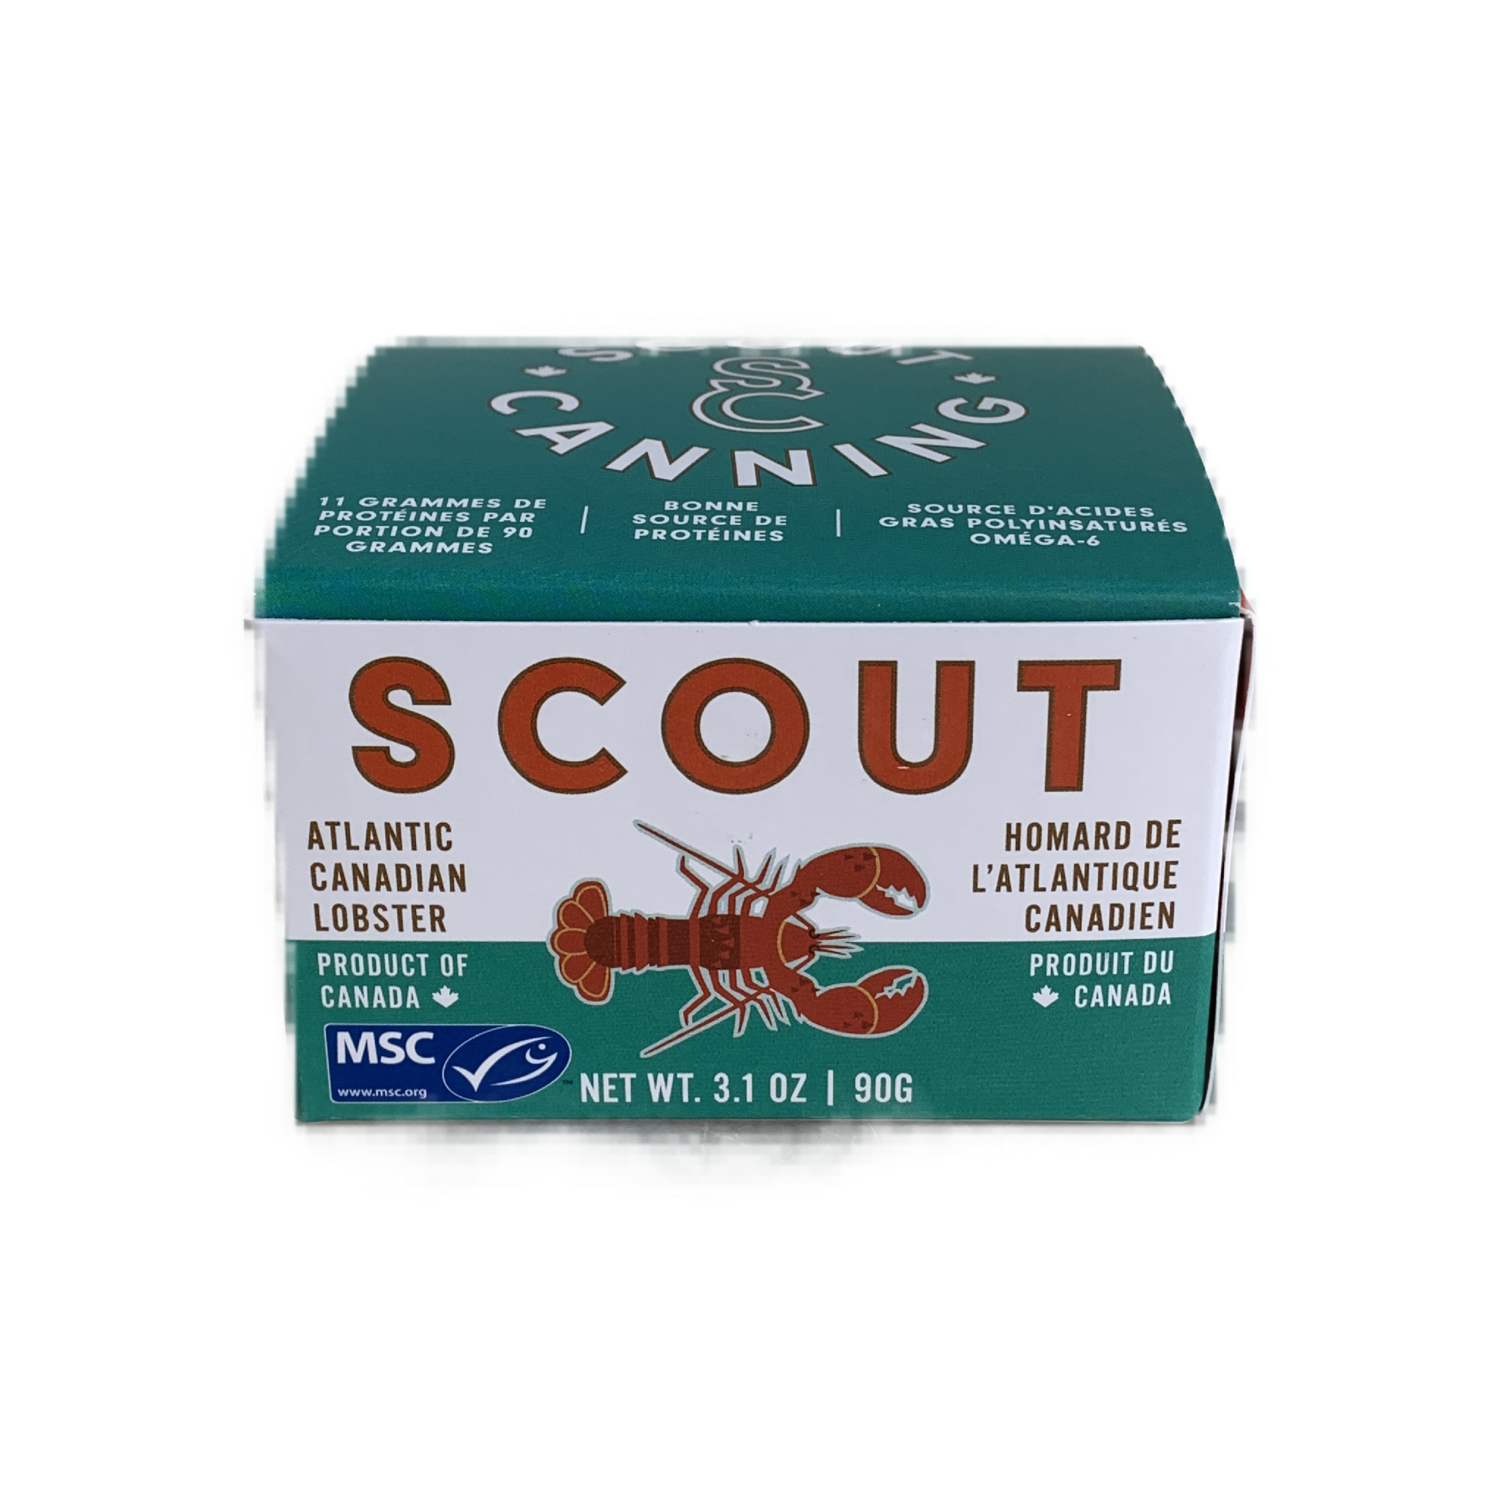 SCOUT atlantic Canadian lobster 